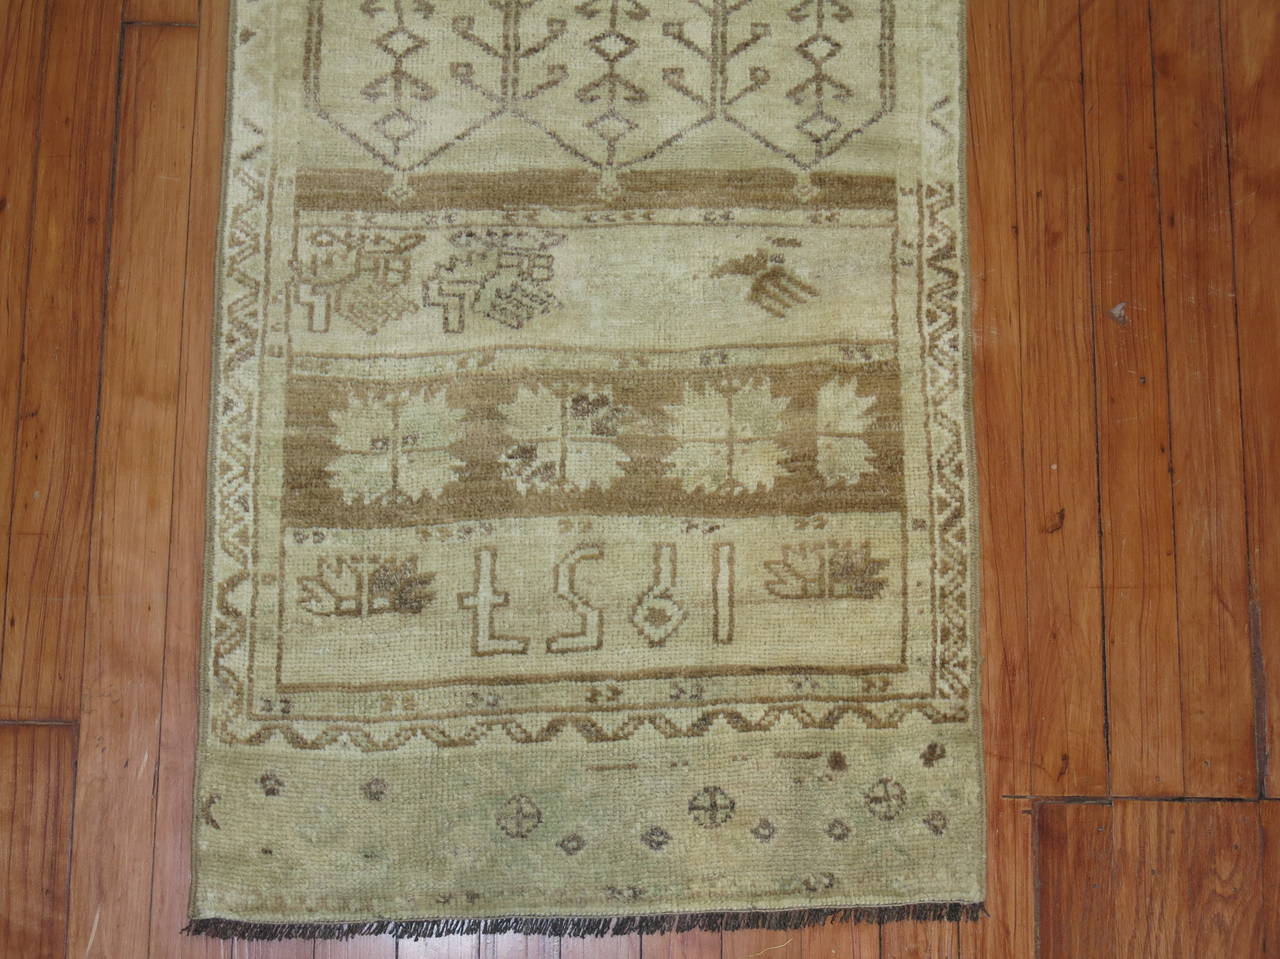 Narrow Mid-Century Turkish Oushak runner. Accents in cream and brown.